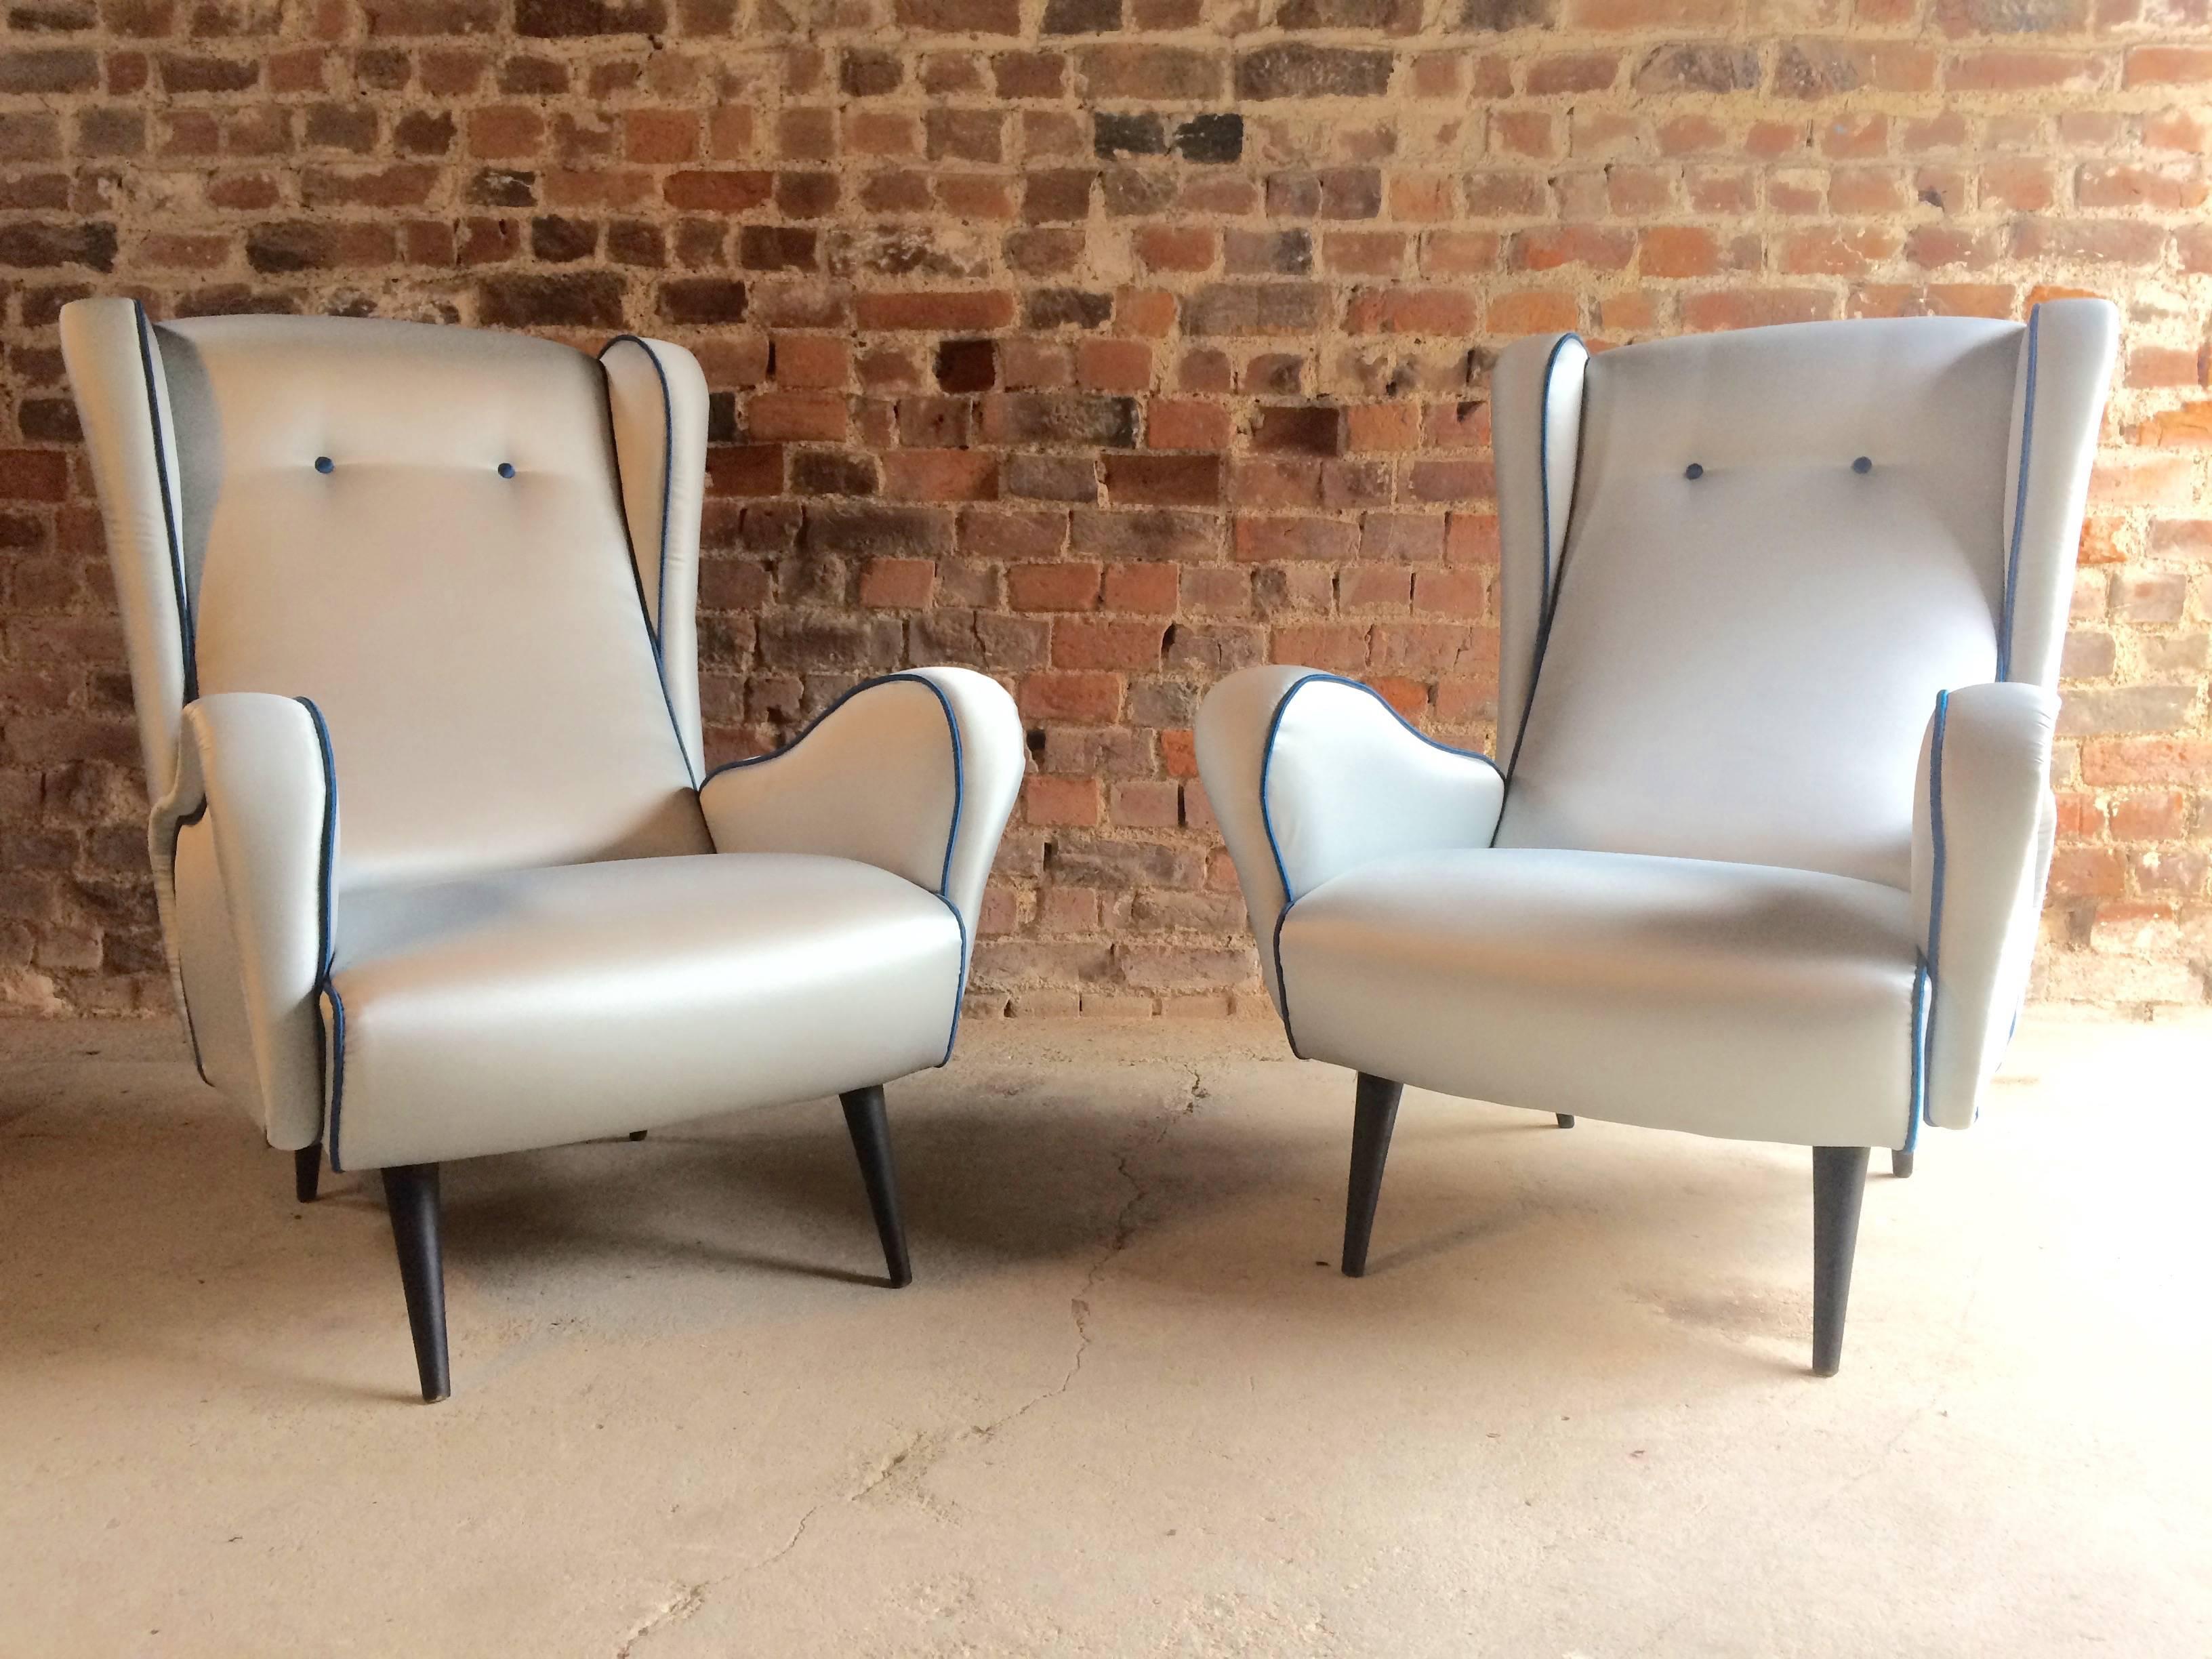 Mid-20th Century Italian Armchairs Lounge Chairs 1950s Vintage Midcentury Blue Upholstered